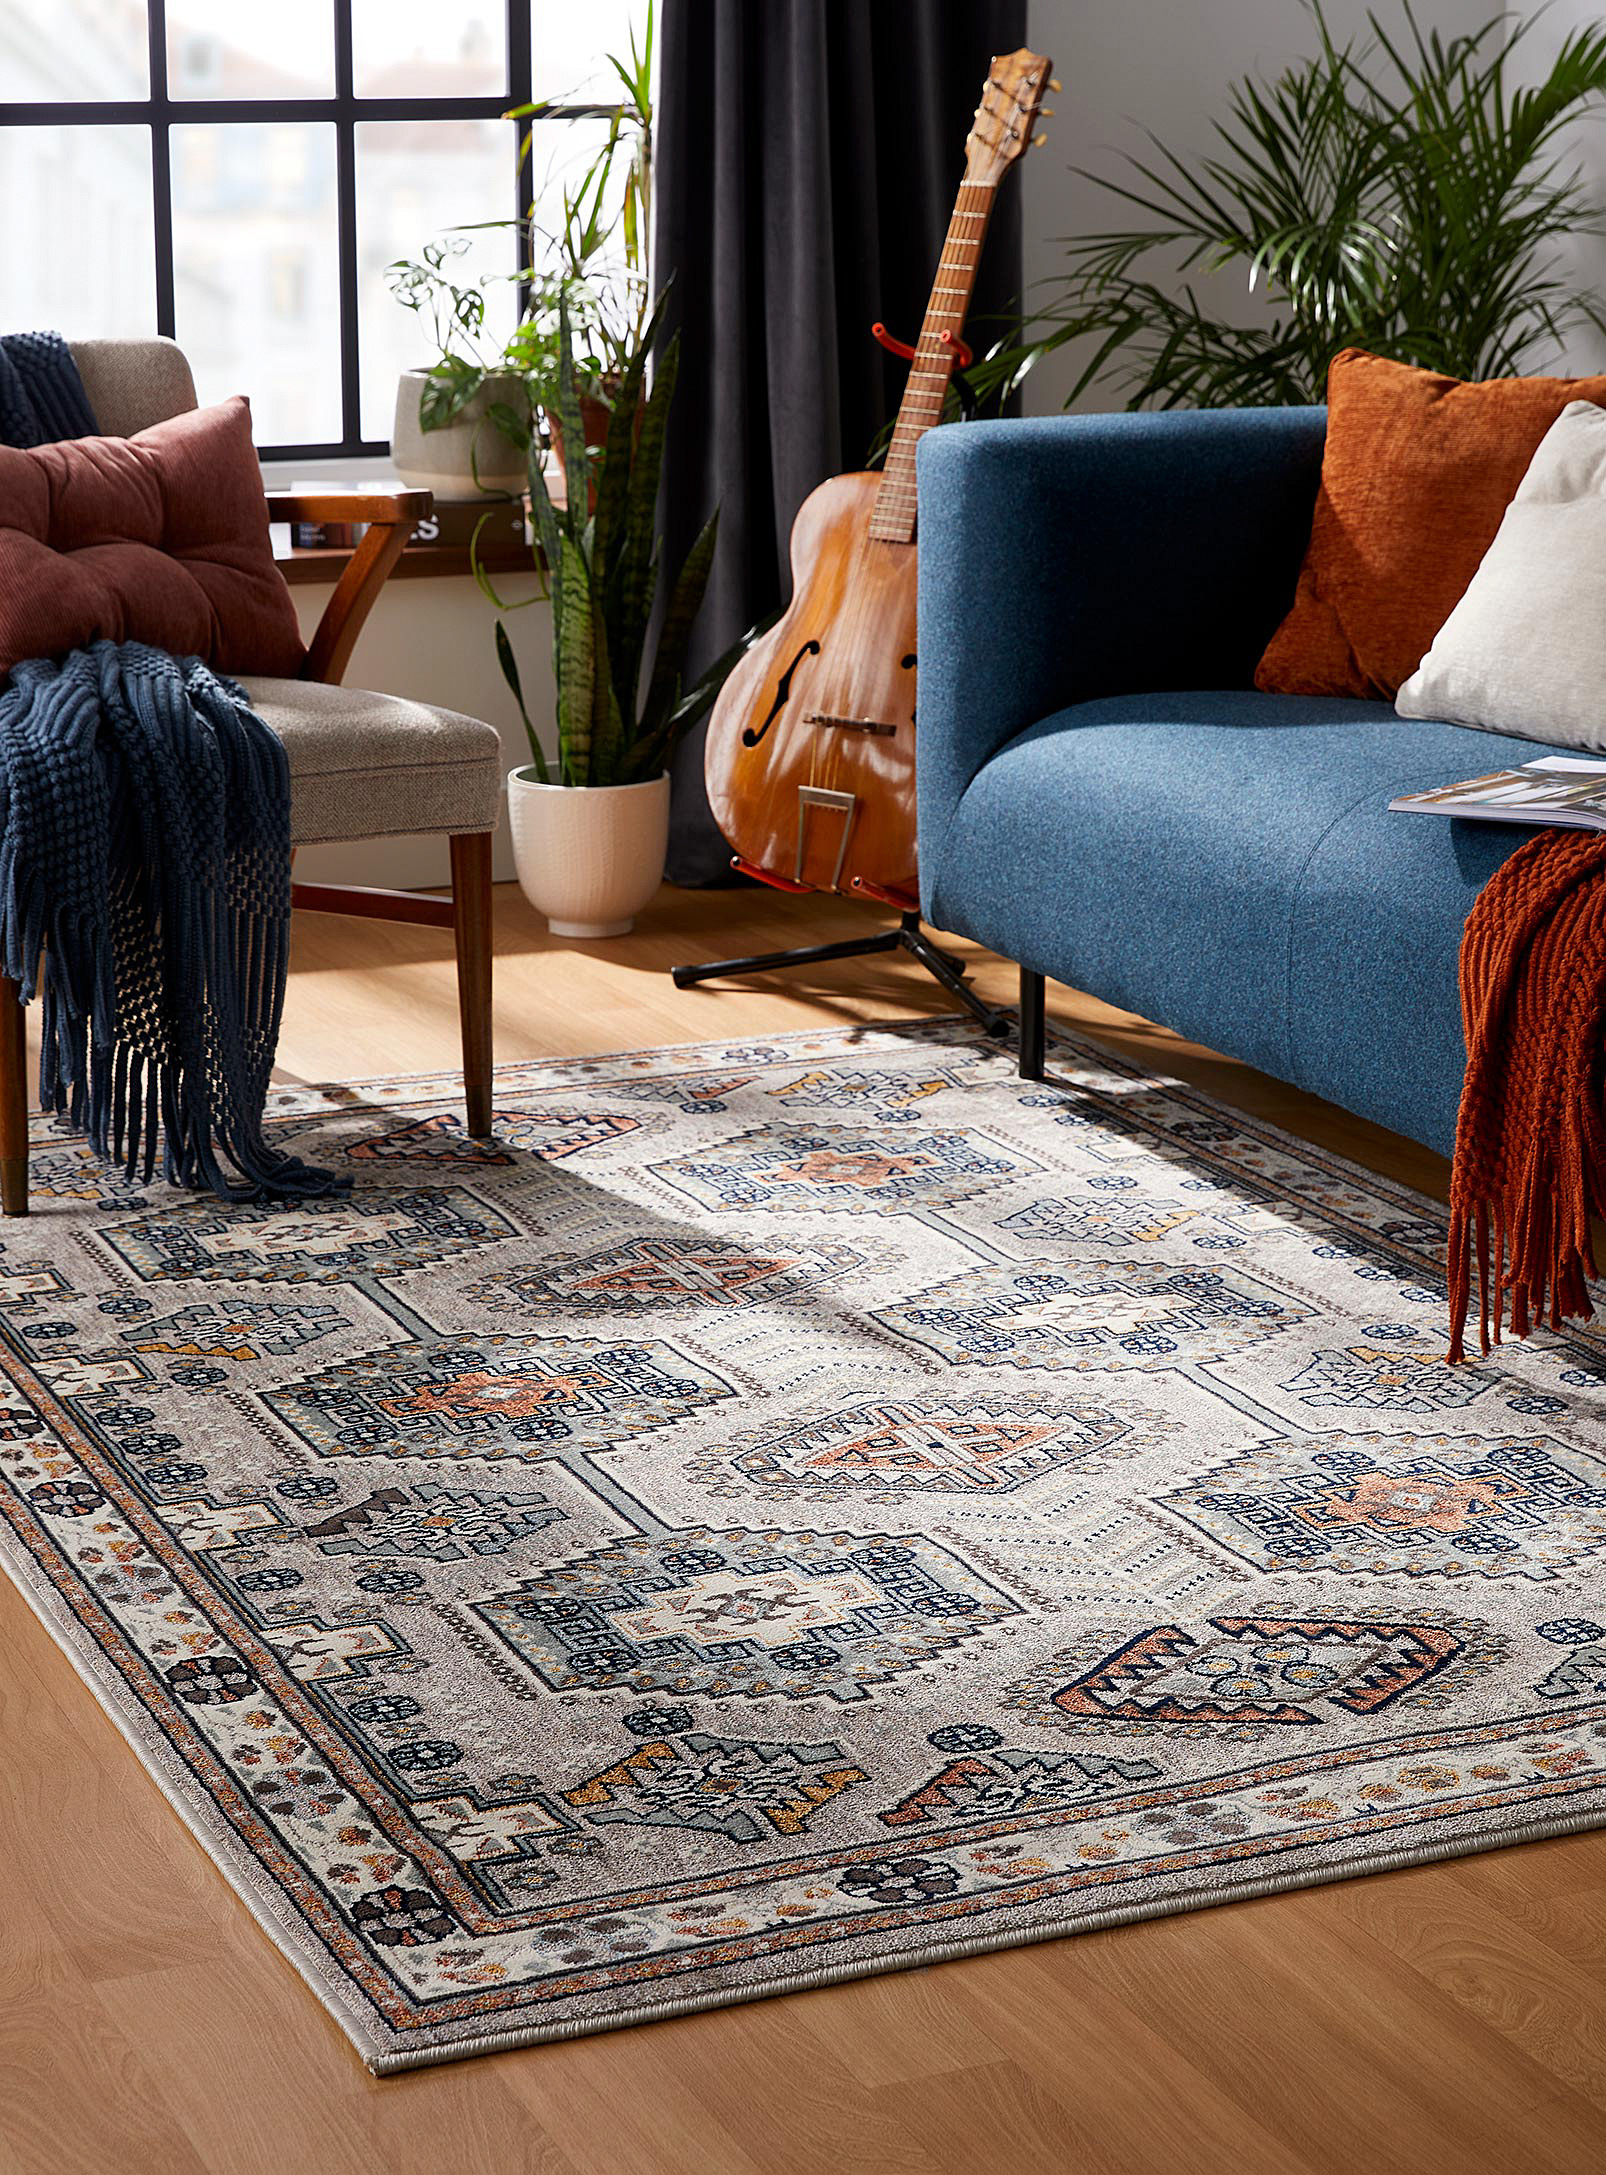 Simons Maison - Persian medallion rug See available sizes